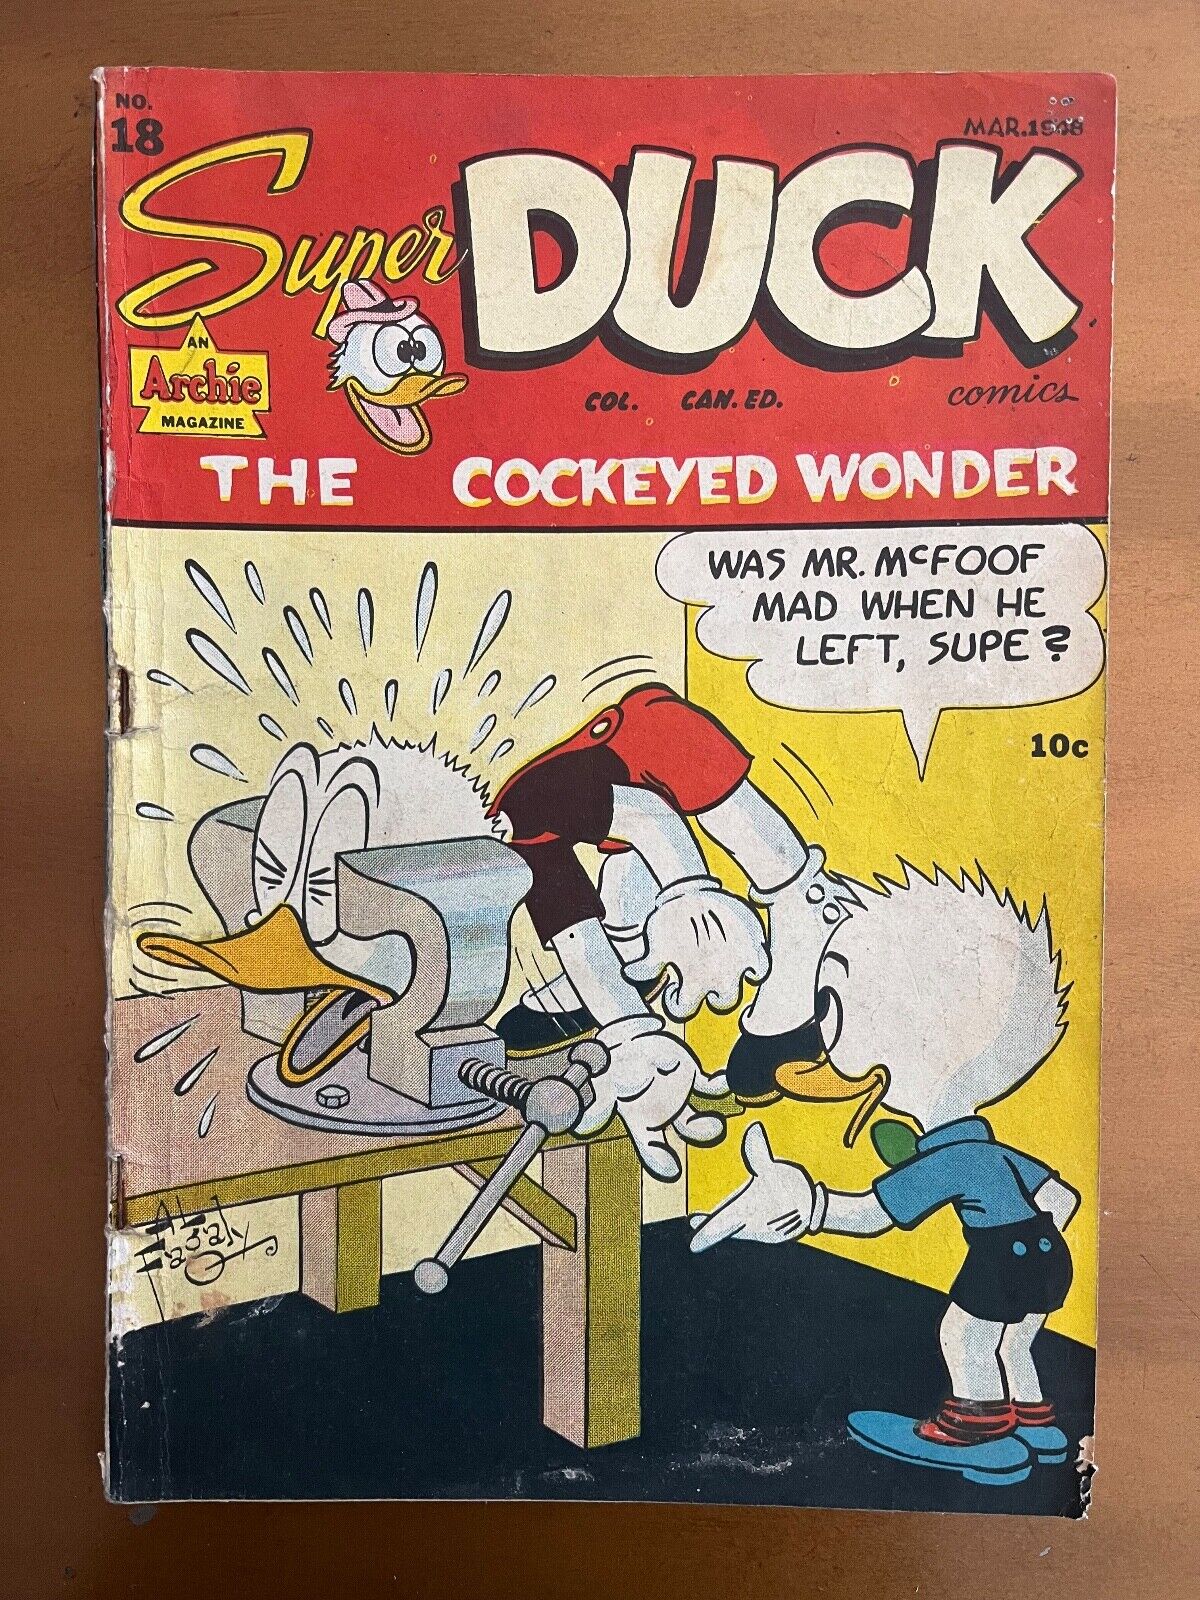 Super Duck 18 (Archie 1948) - THE COCKEYED WONDER - RARE CANADIAN VARIANT